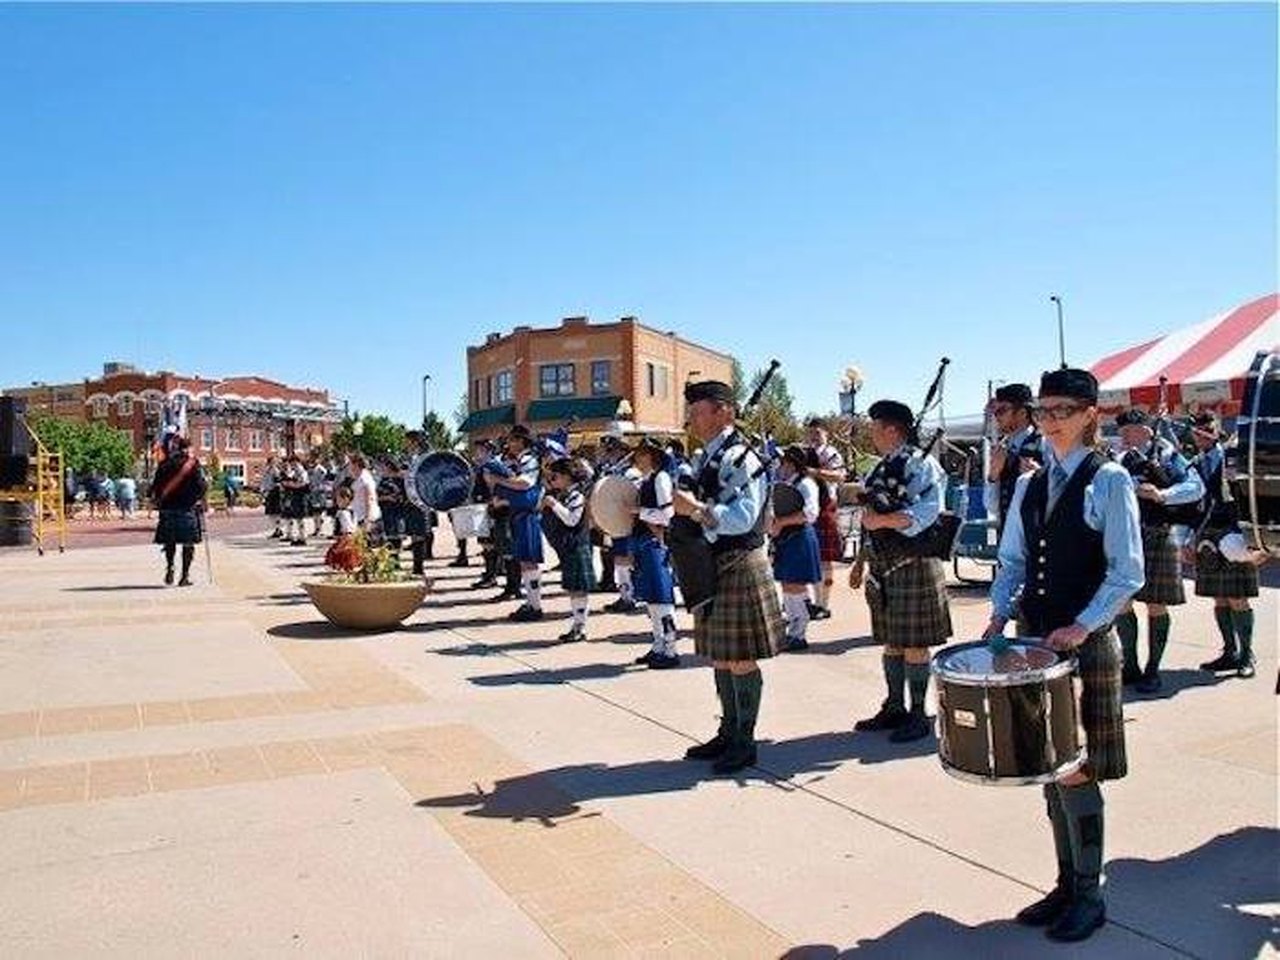 The Cheyenne Celtic Festival Is A Fantastic Wyoming Celebration